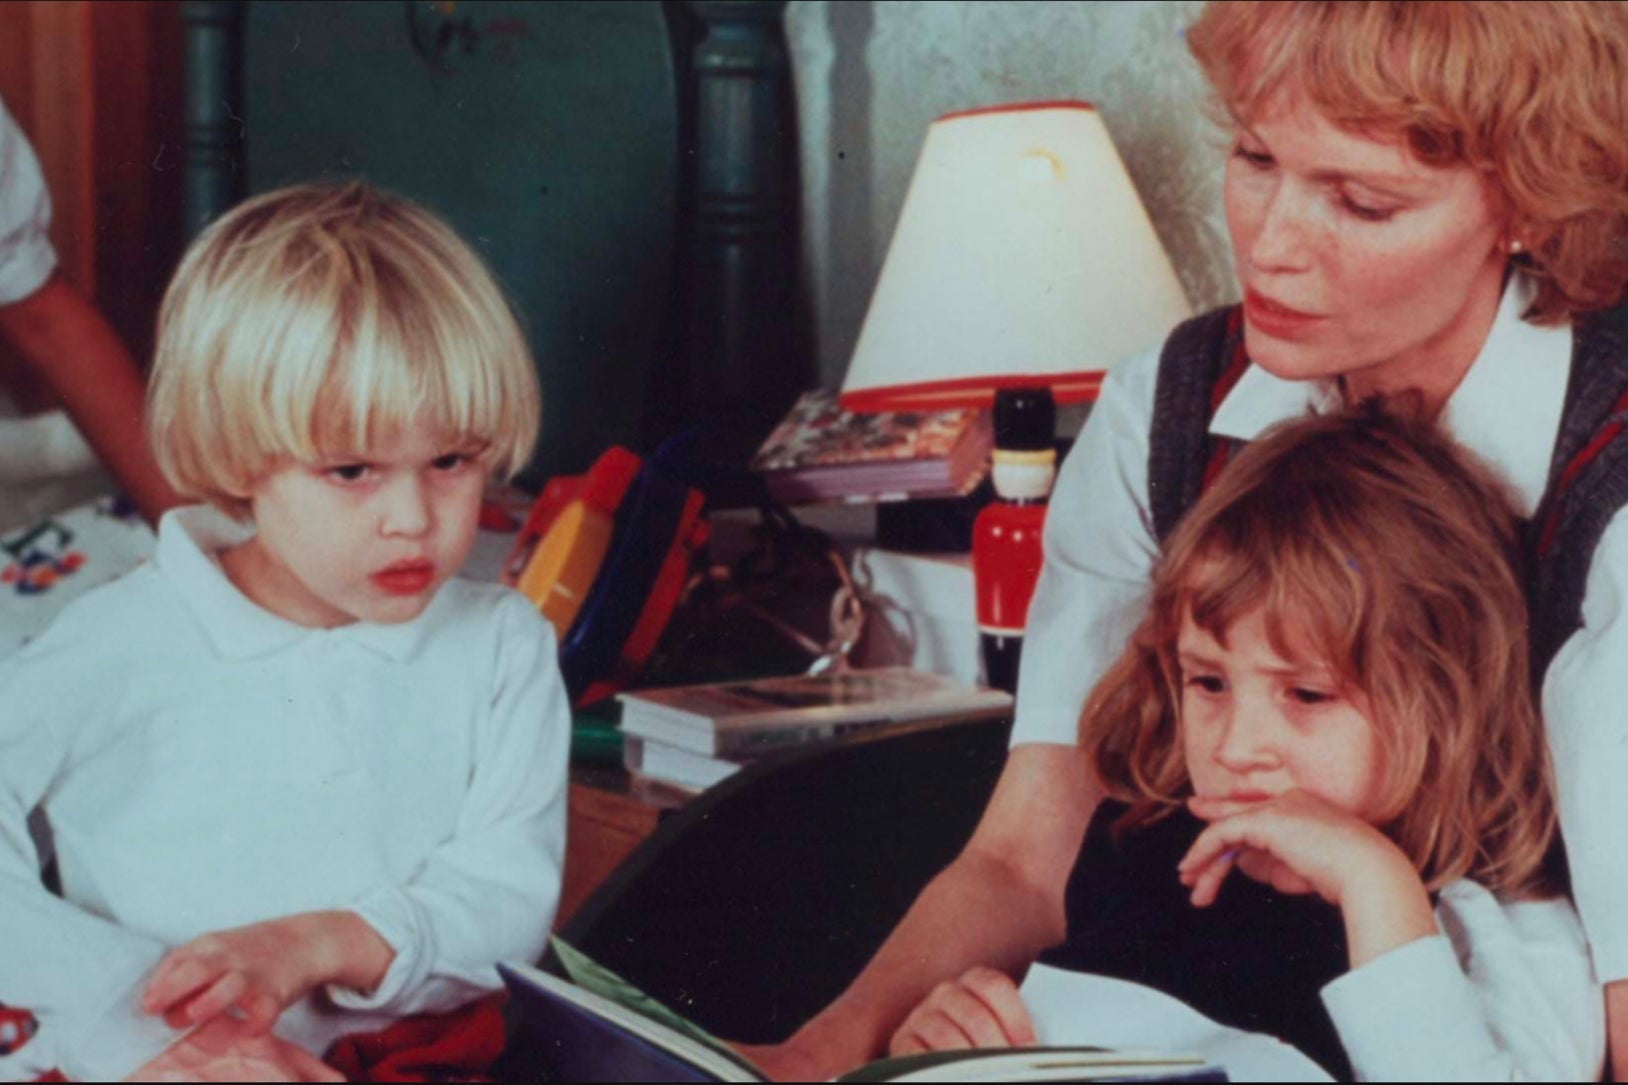 All three have long hair—Ronan’s blonde hair is in a long bowl cut—as Mia appears to read to them from a children’s book